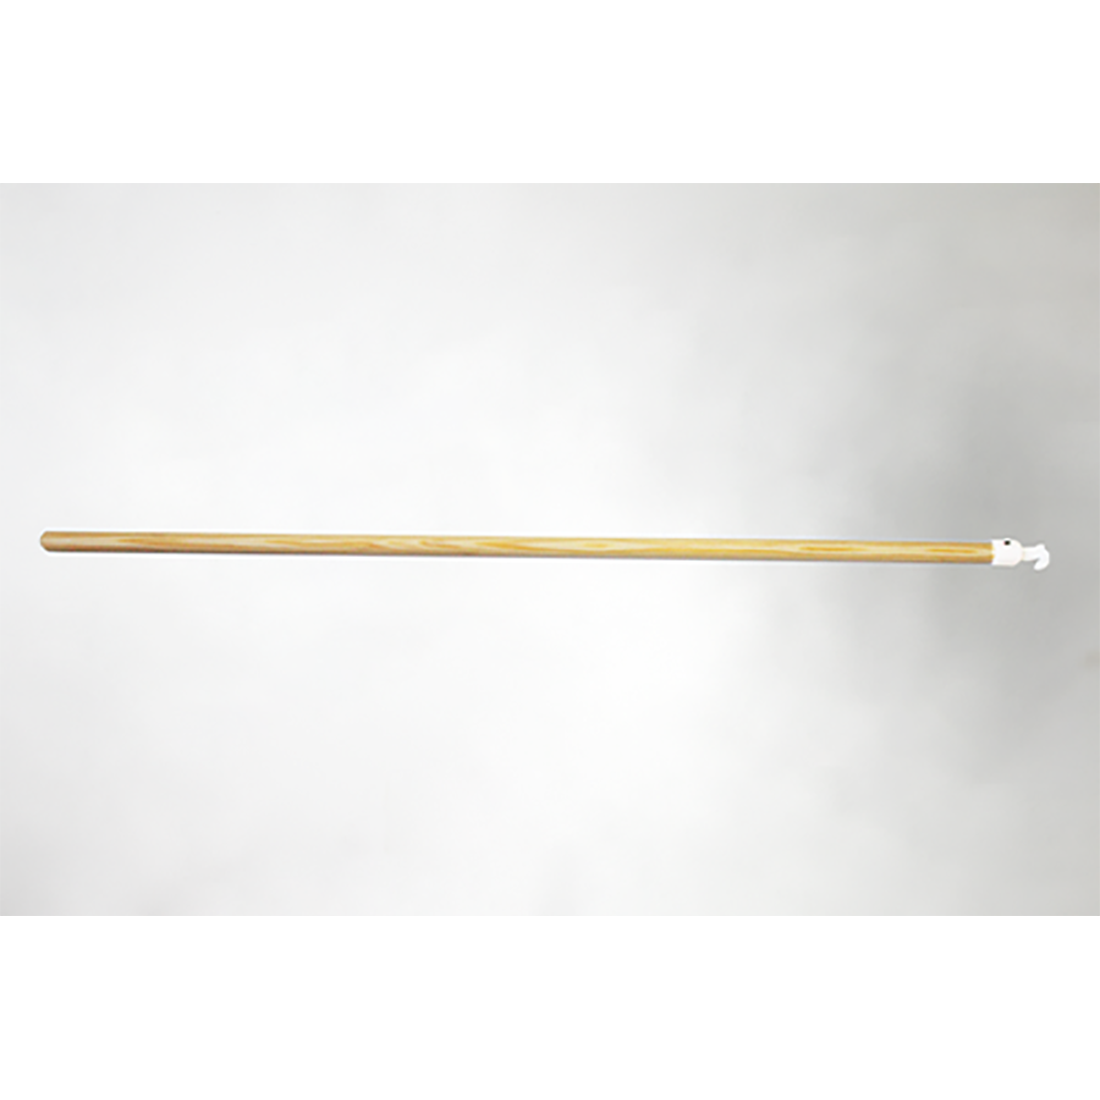 Wooden Rod With Plastic Clip - 35 in.